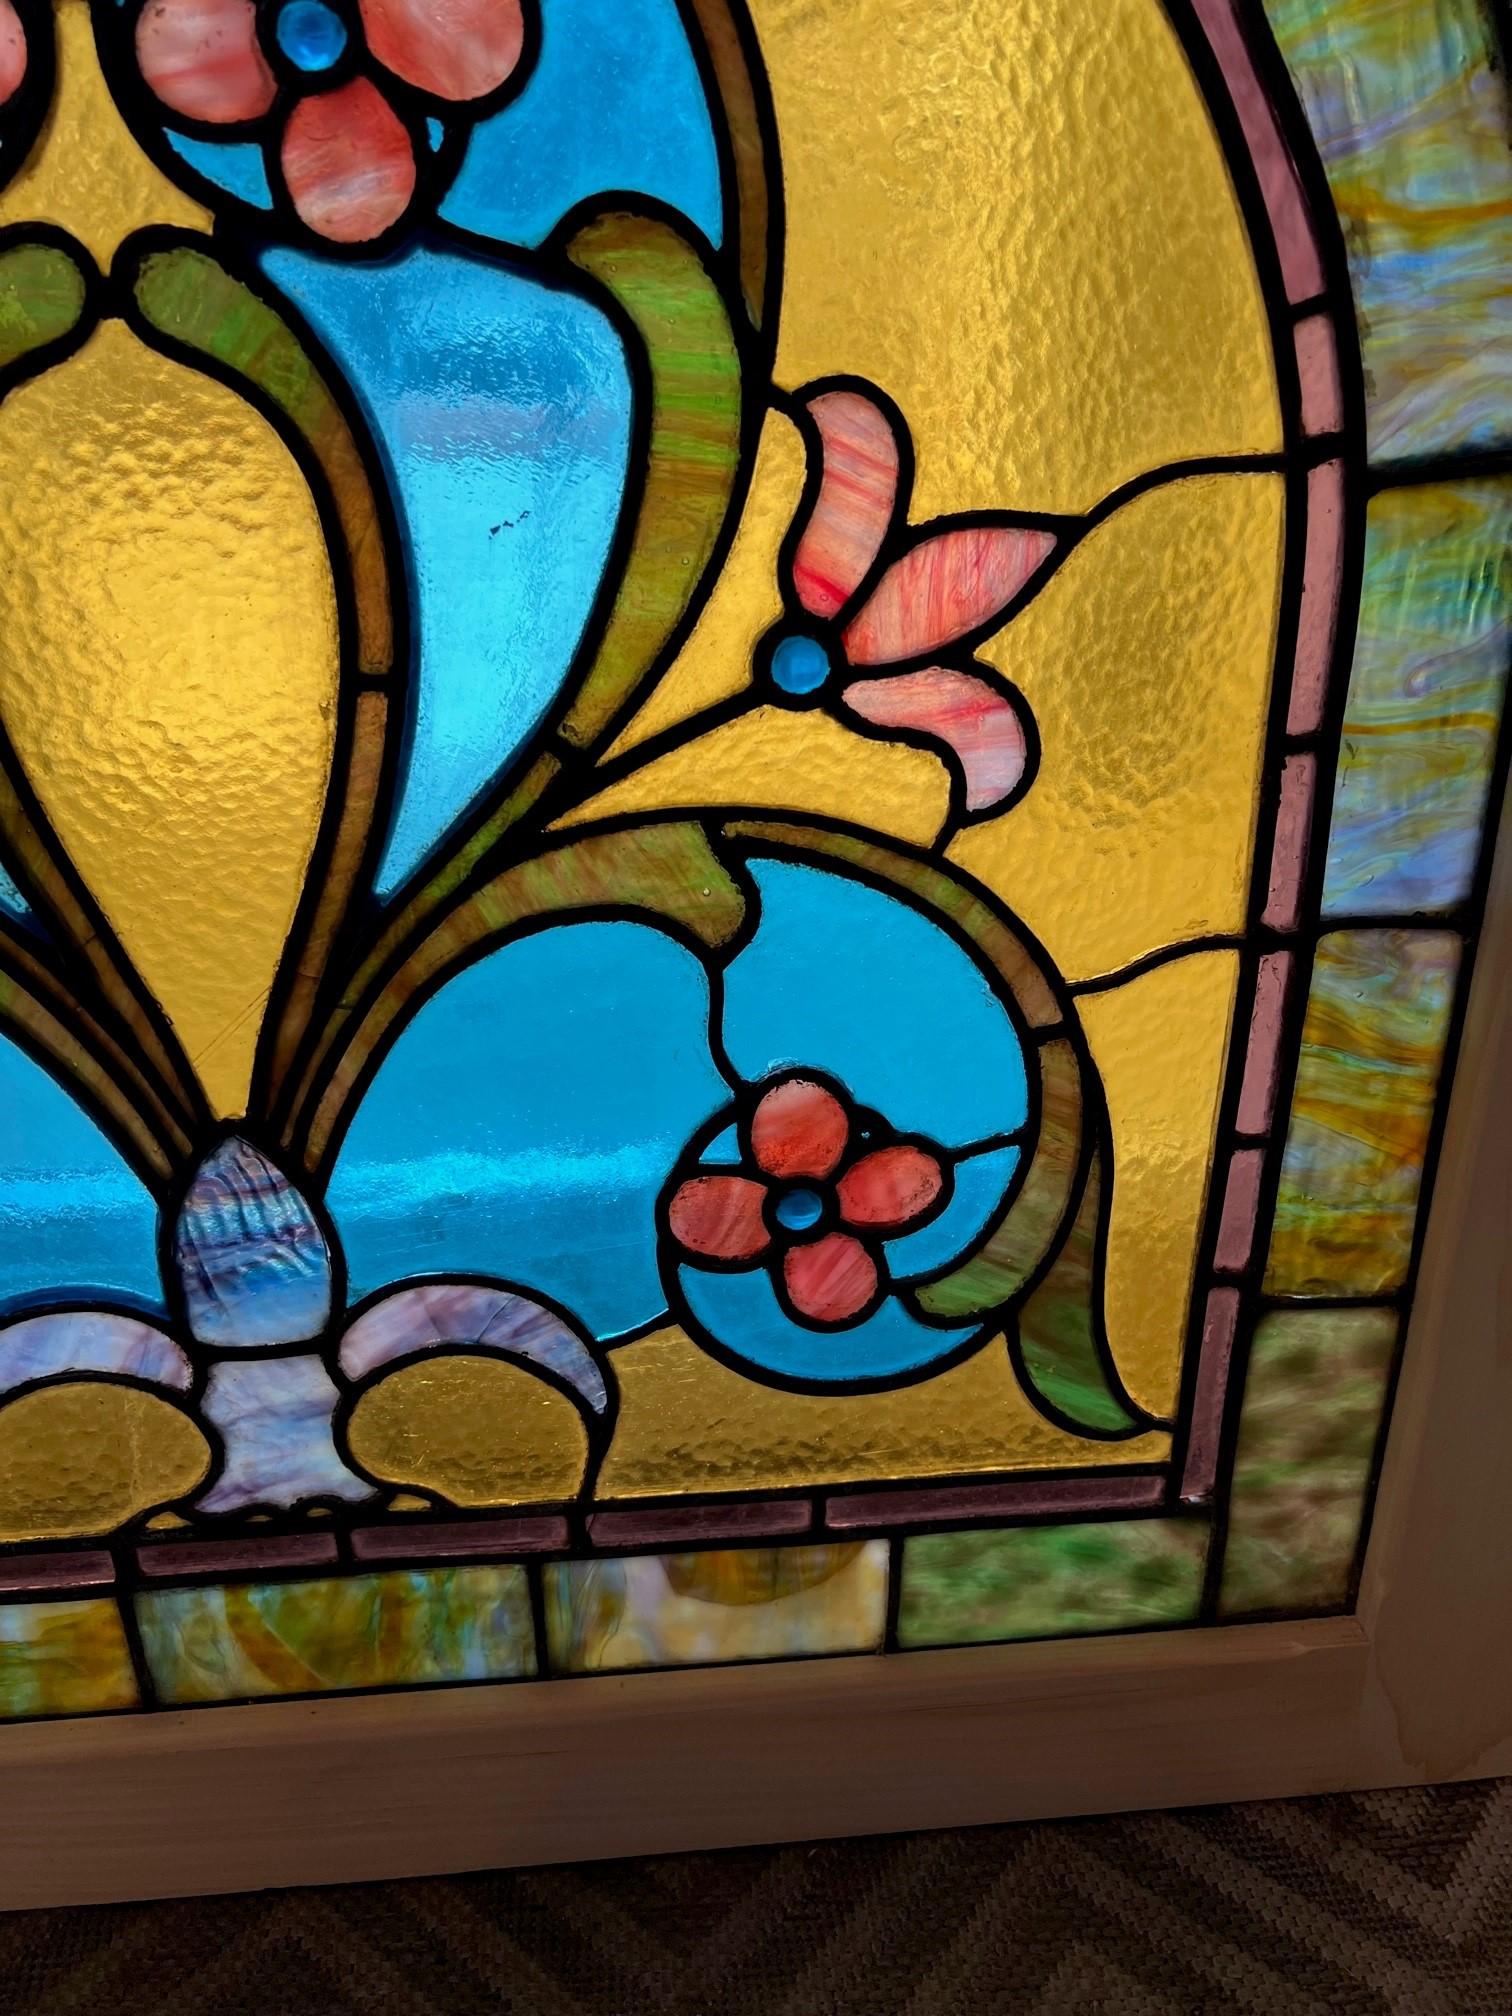 stained glass arch window